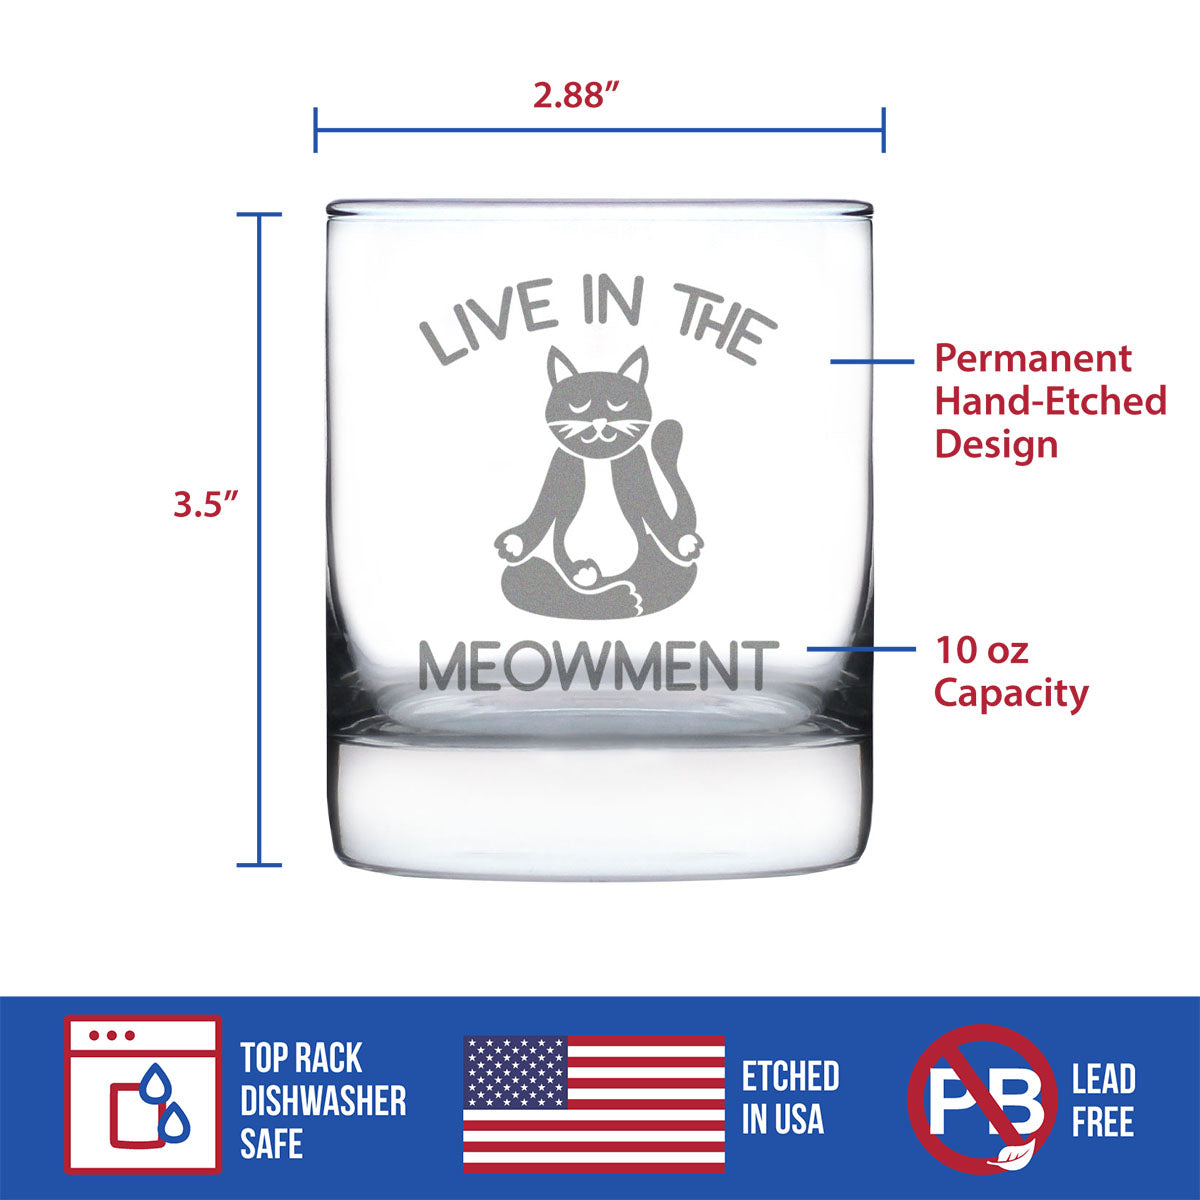 Live In The Meowment - Whiskey Rocks Glass - Funny Cat Gifts and Meditation Themed Decor - 10.25 Oz Glasses